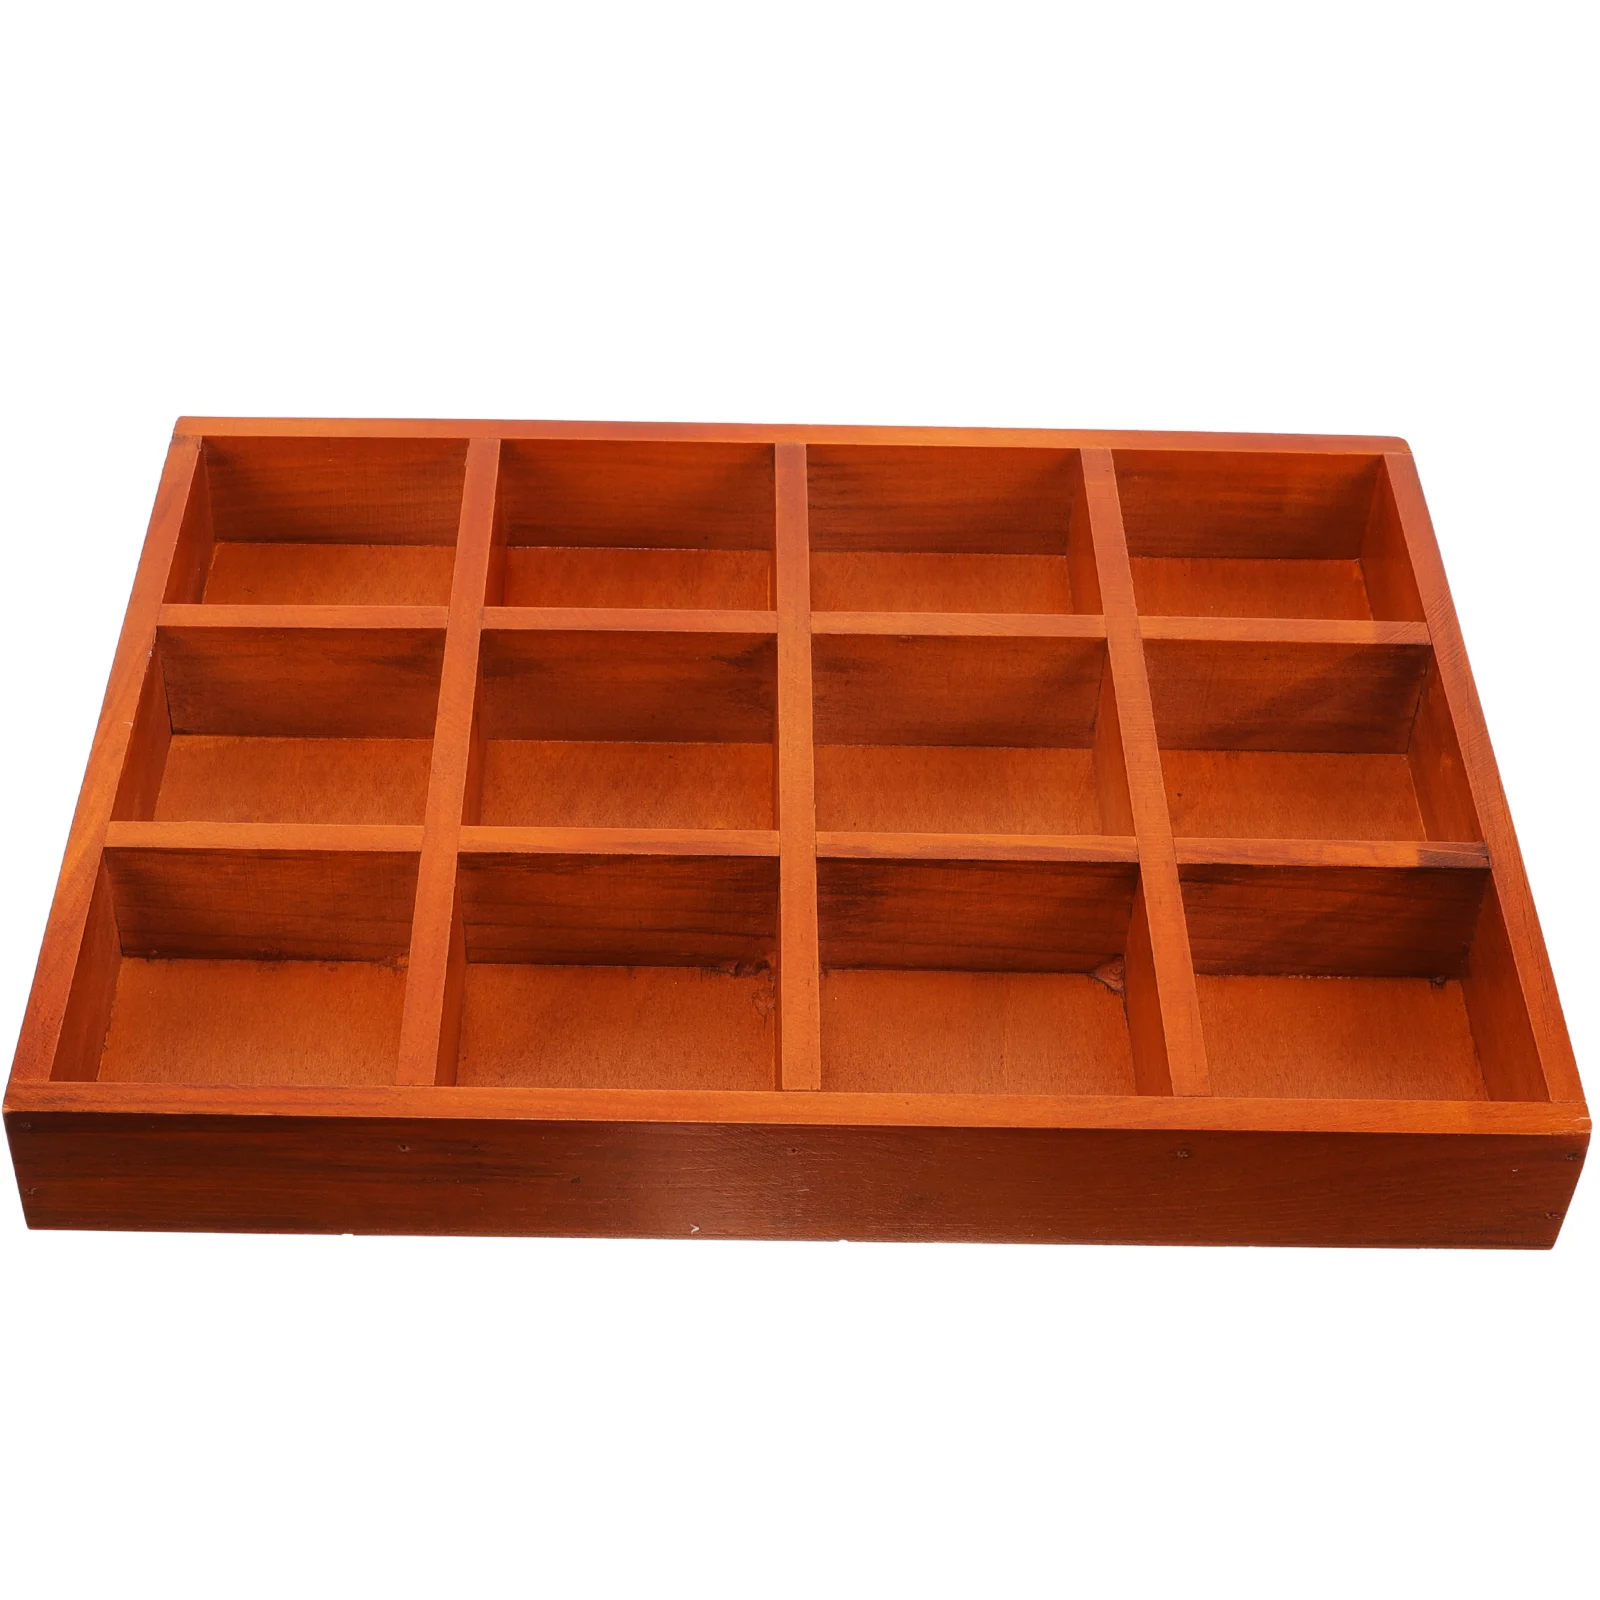 

Drawer Organizer Tray Large Planter Wood Flower Boxes Wooden Rectangle Pot Rectangular Planters For Indoor Plants Flowerpots